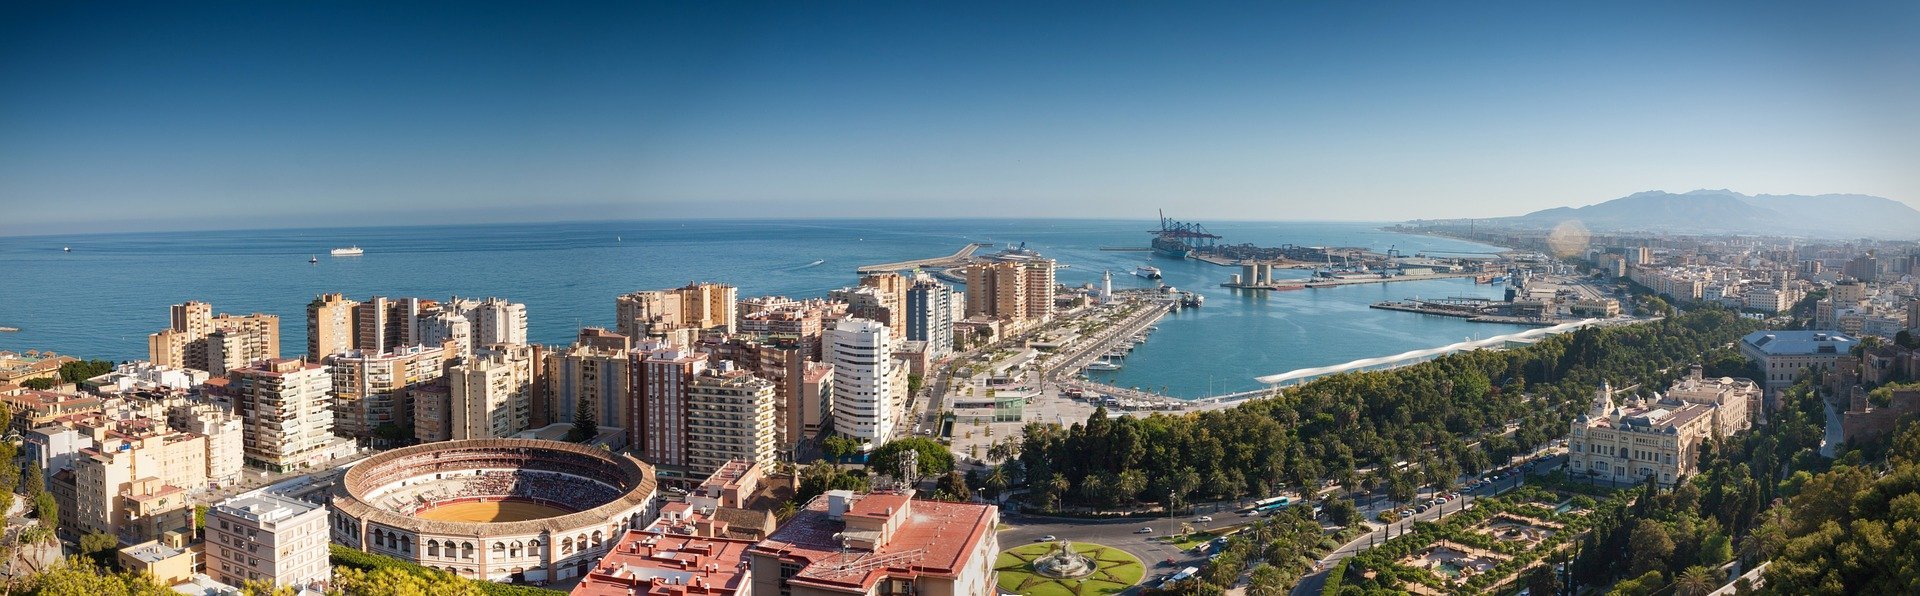 How To Get From Malaga Airport To City Center - All Possible Ways